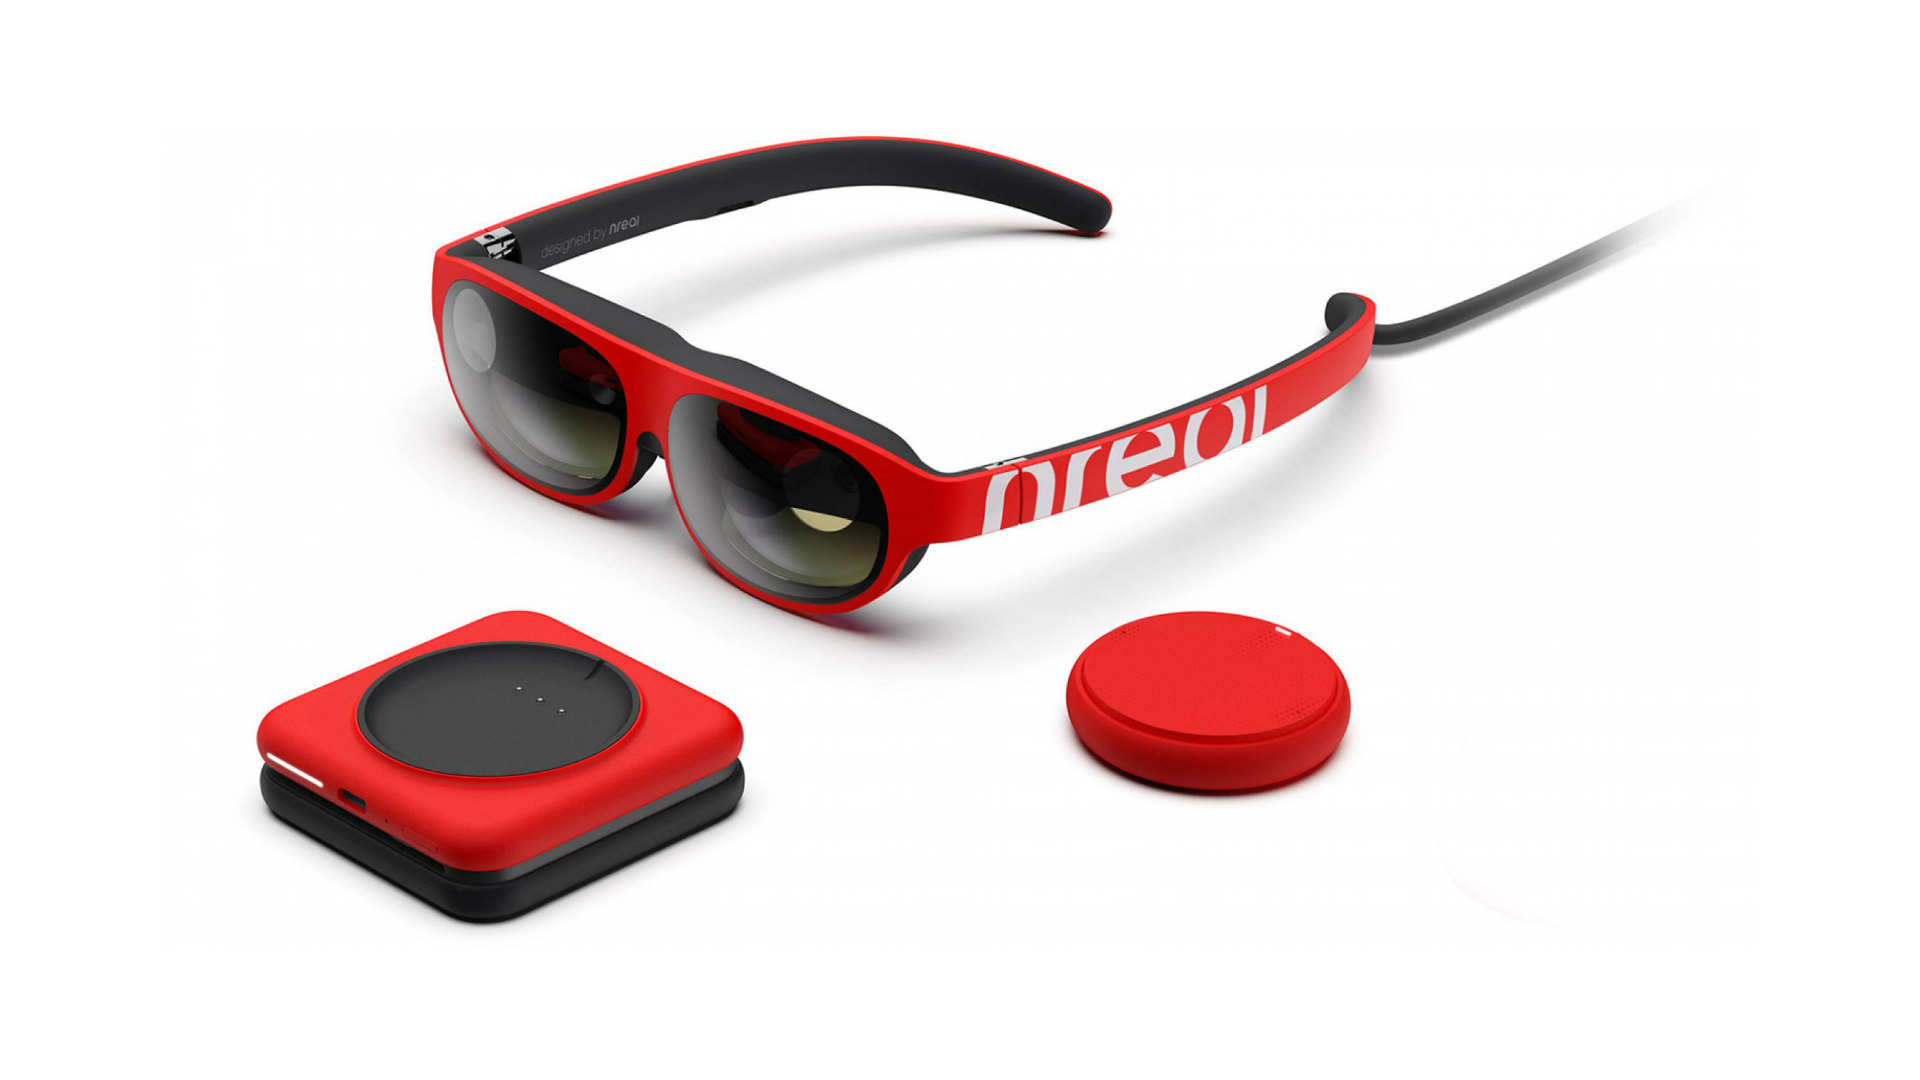 Nreal Light Developer Kits Now Available for Pre-order, Starting at $1,200  – Road to VR